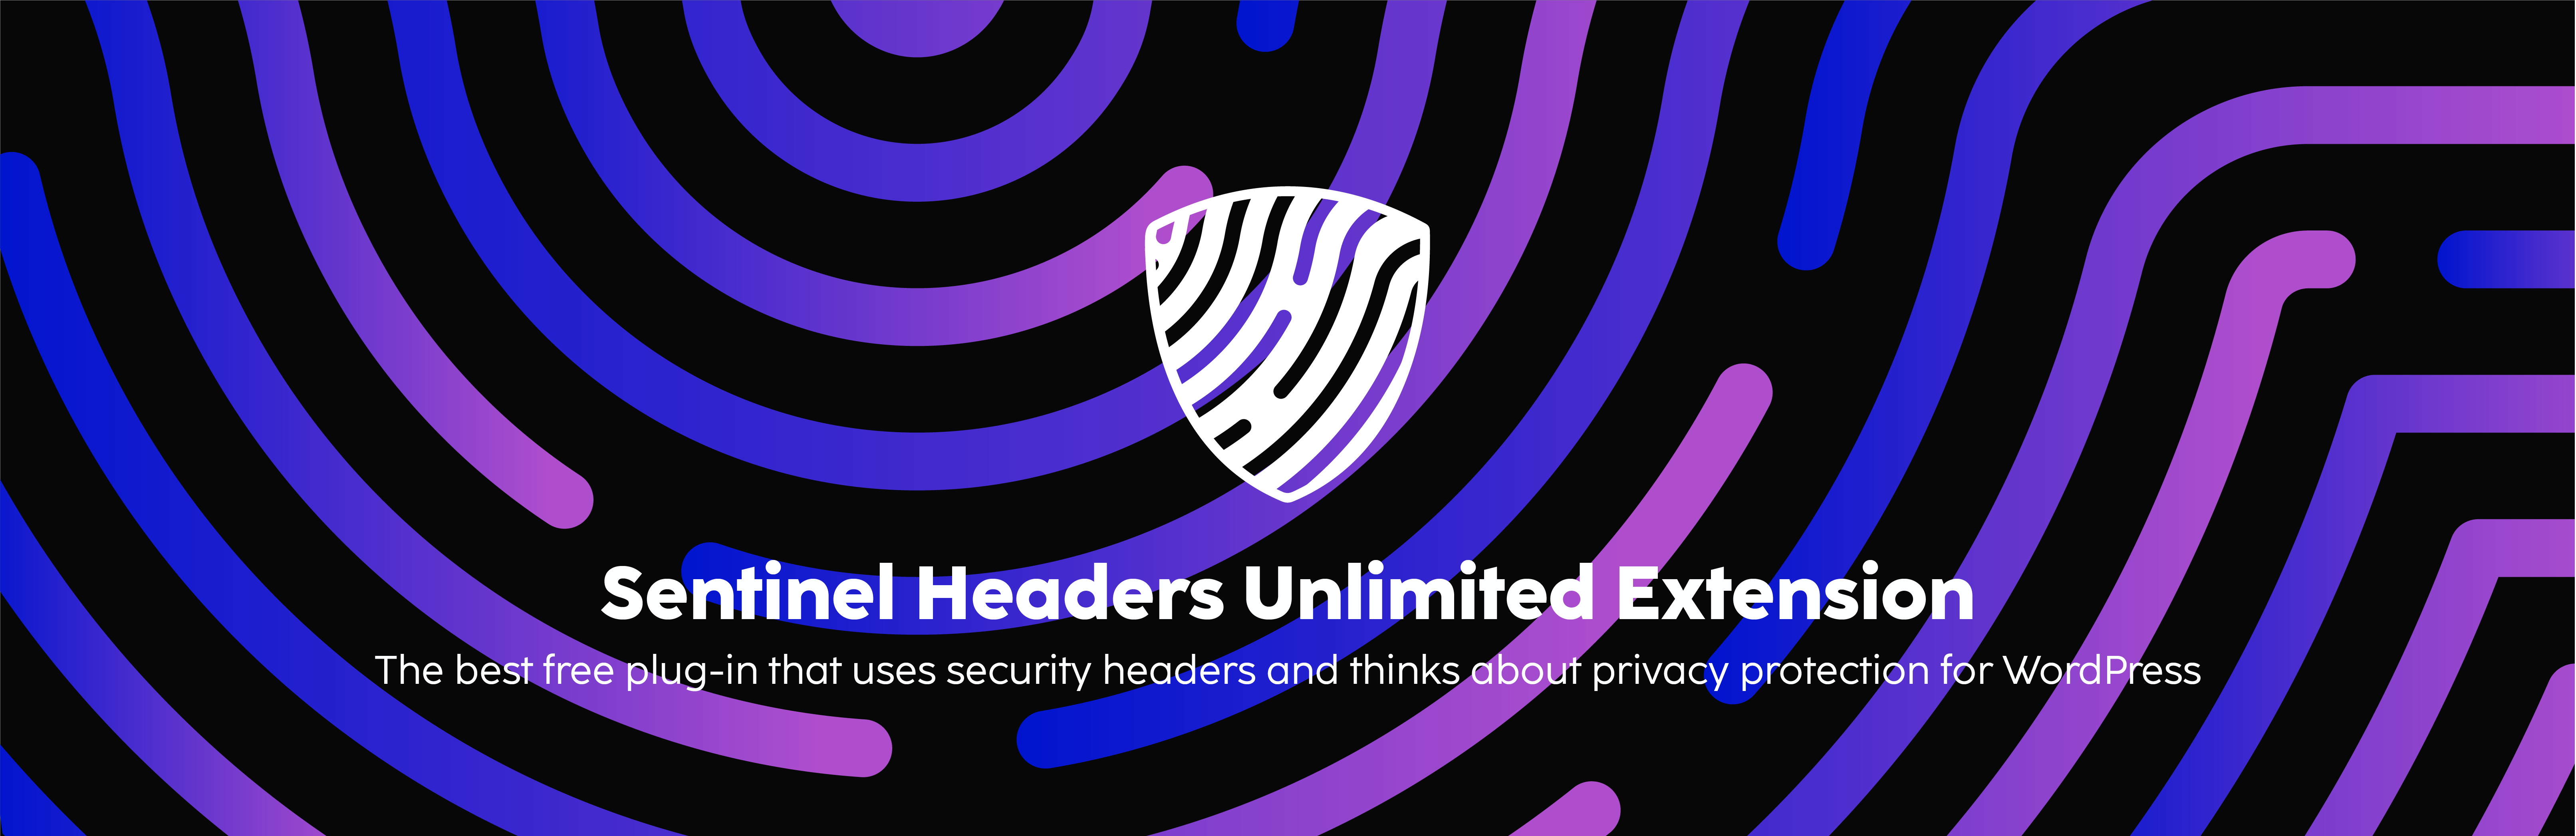 Sentinel Headers Unlimited Extension Preview Wordpress Plugin - Rating, Reviews, Demo & Download